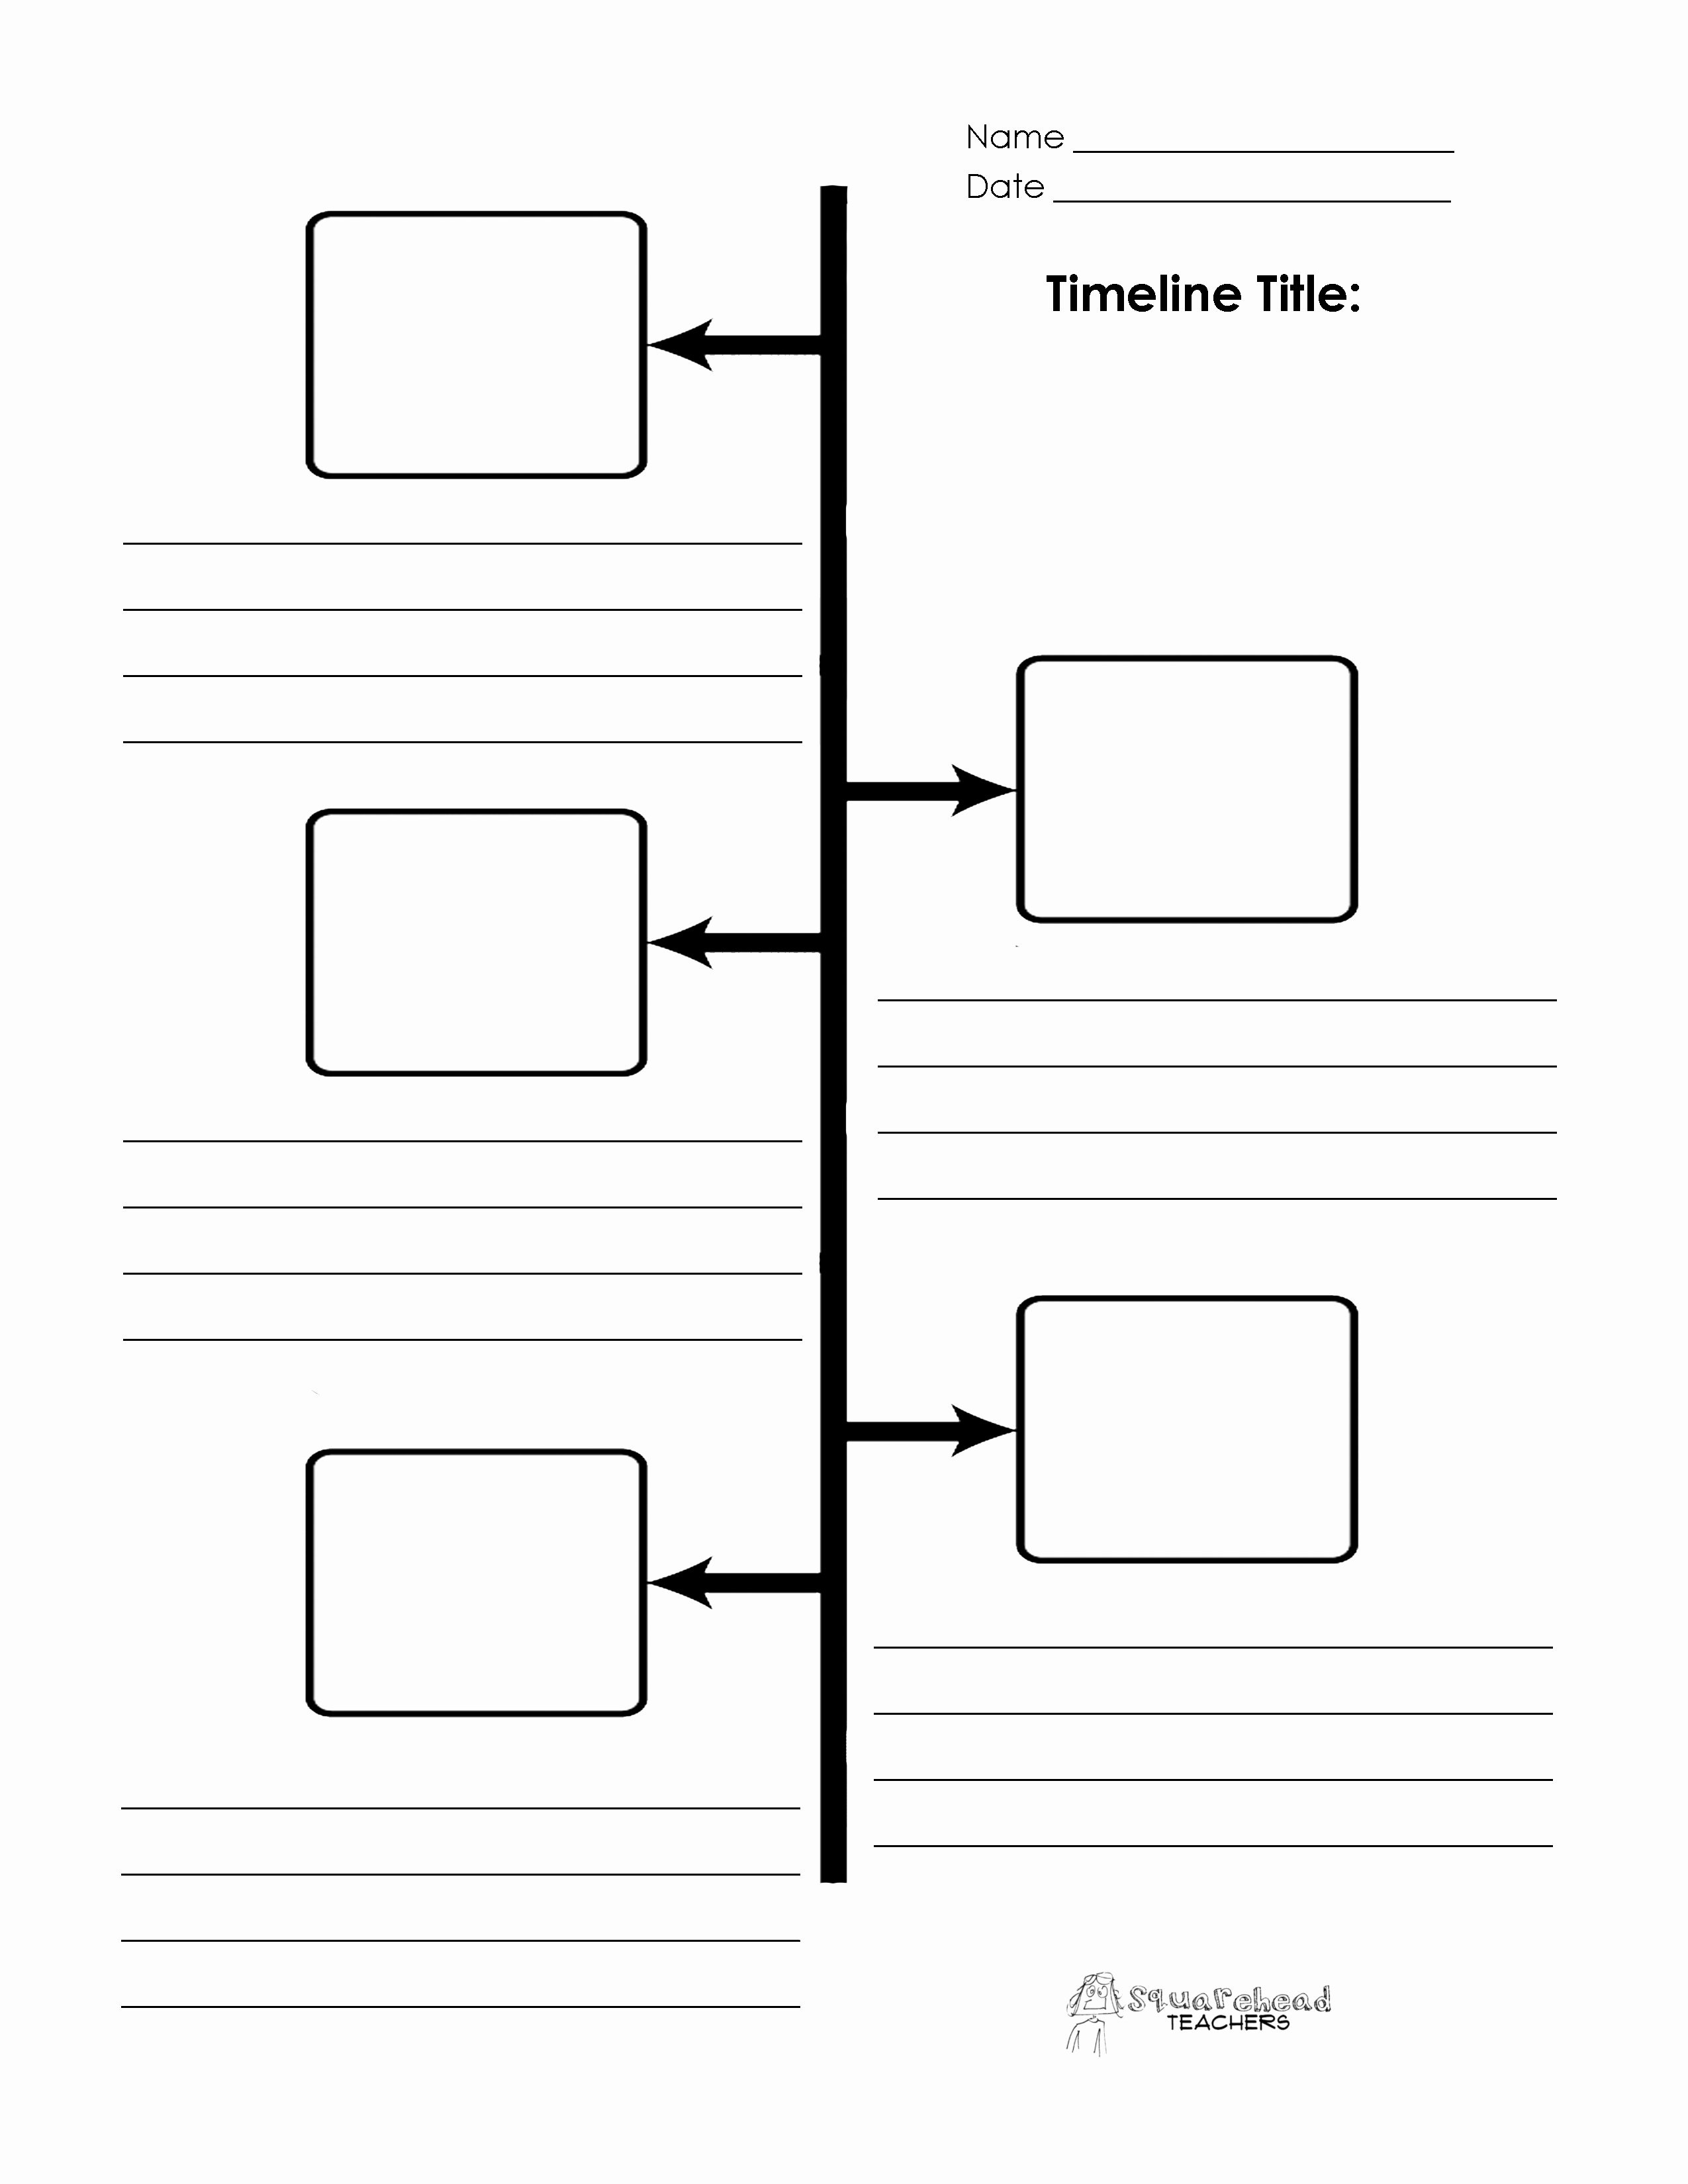 Free Printable Timeline Template Awesome Free Blank Timeline - Free Blank Timeline Template Printable